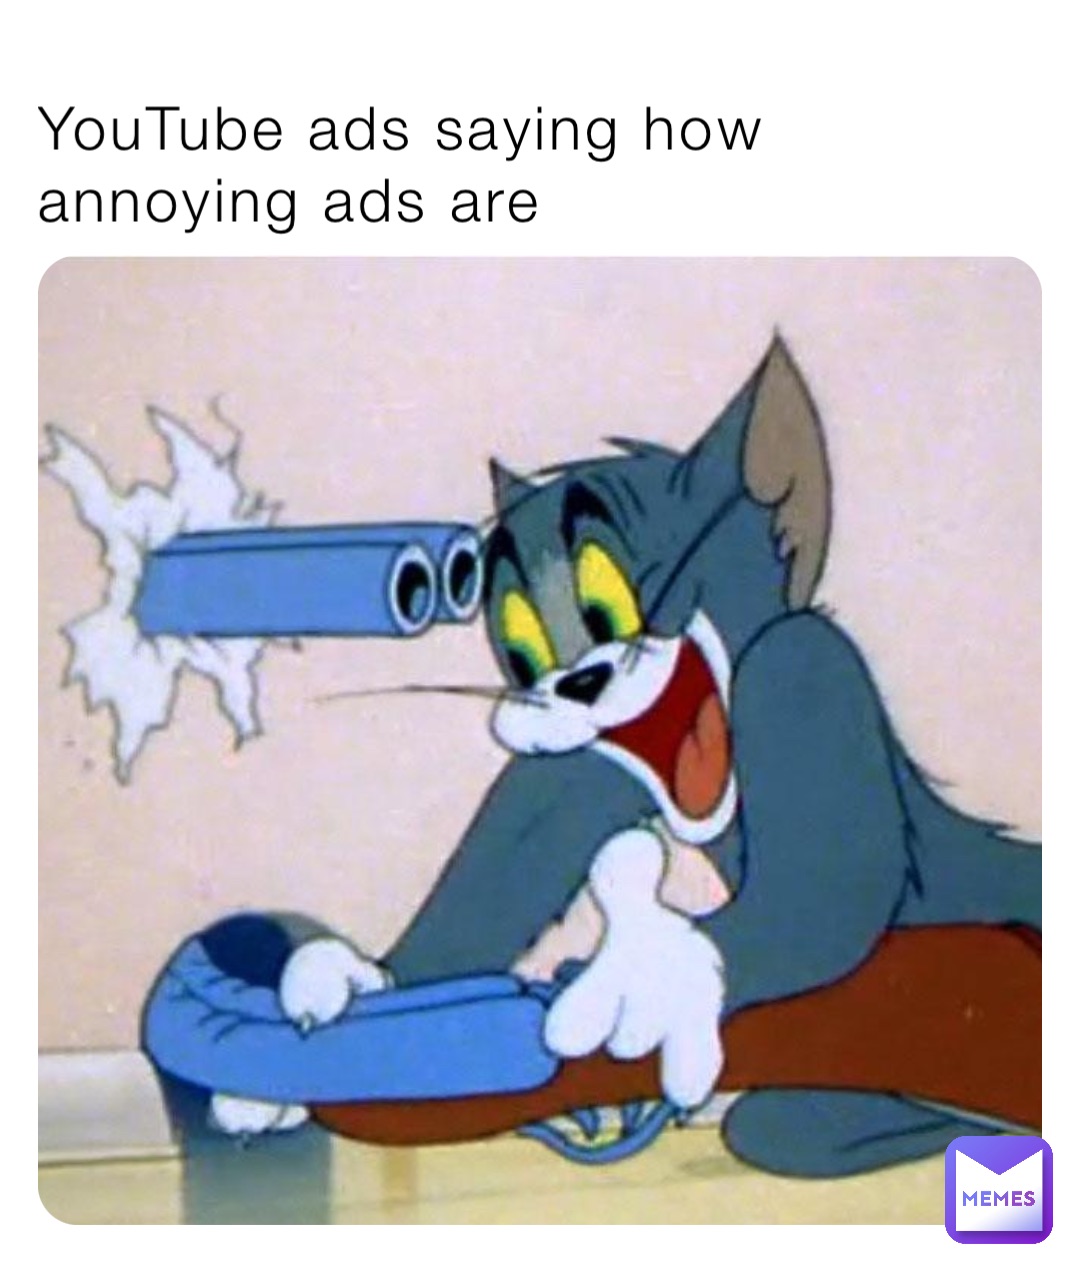 YouTube ads saying how annoying ads are